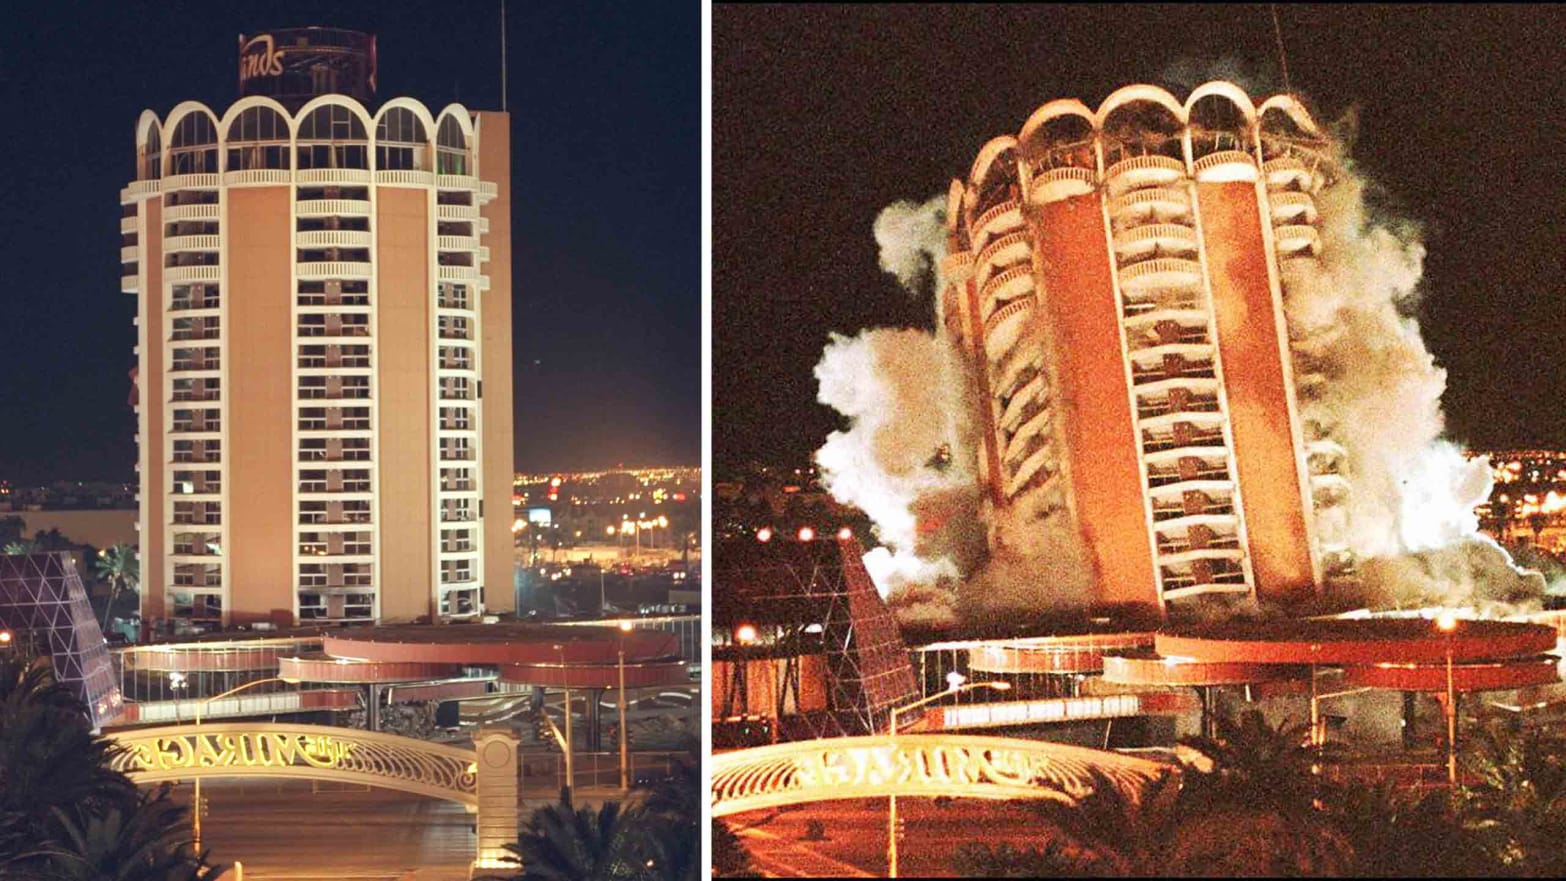 This Iconic Casino From the 1950s Is Heading Back to the Las Vegas